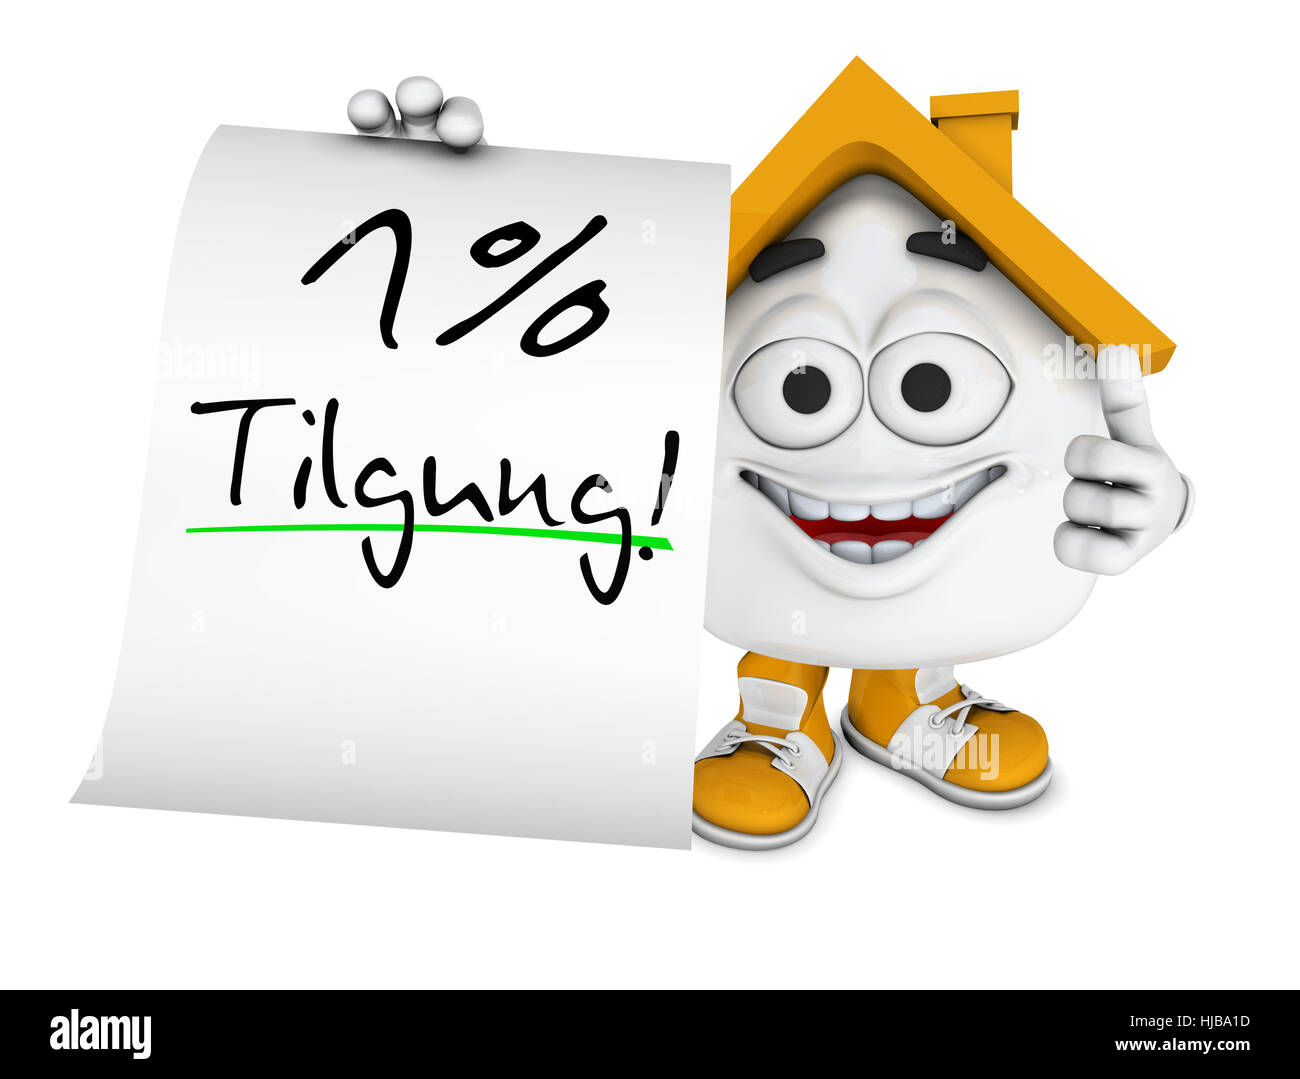 house, building, percent, credit, financing, loan, real estate, pictogram, Stock Photo